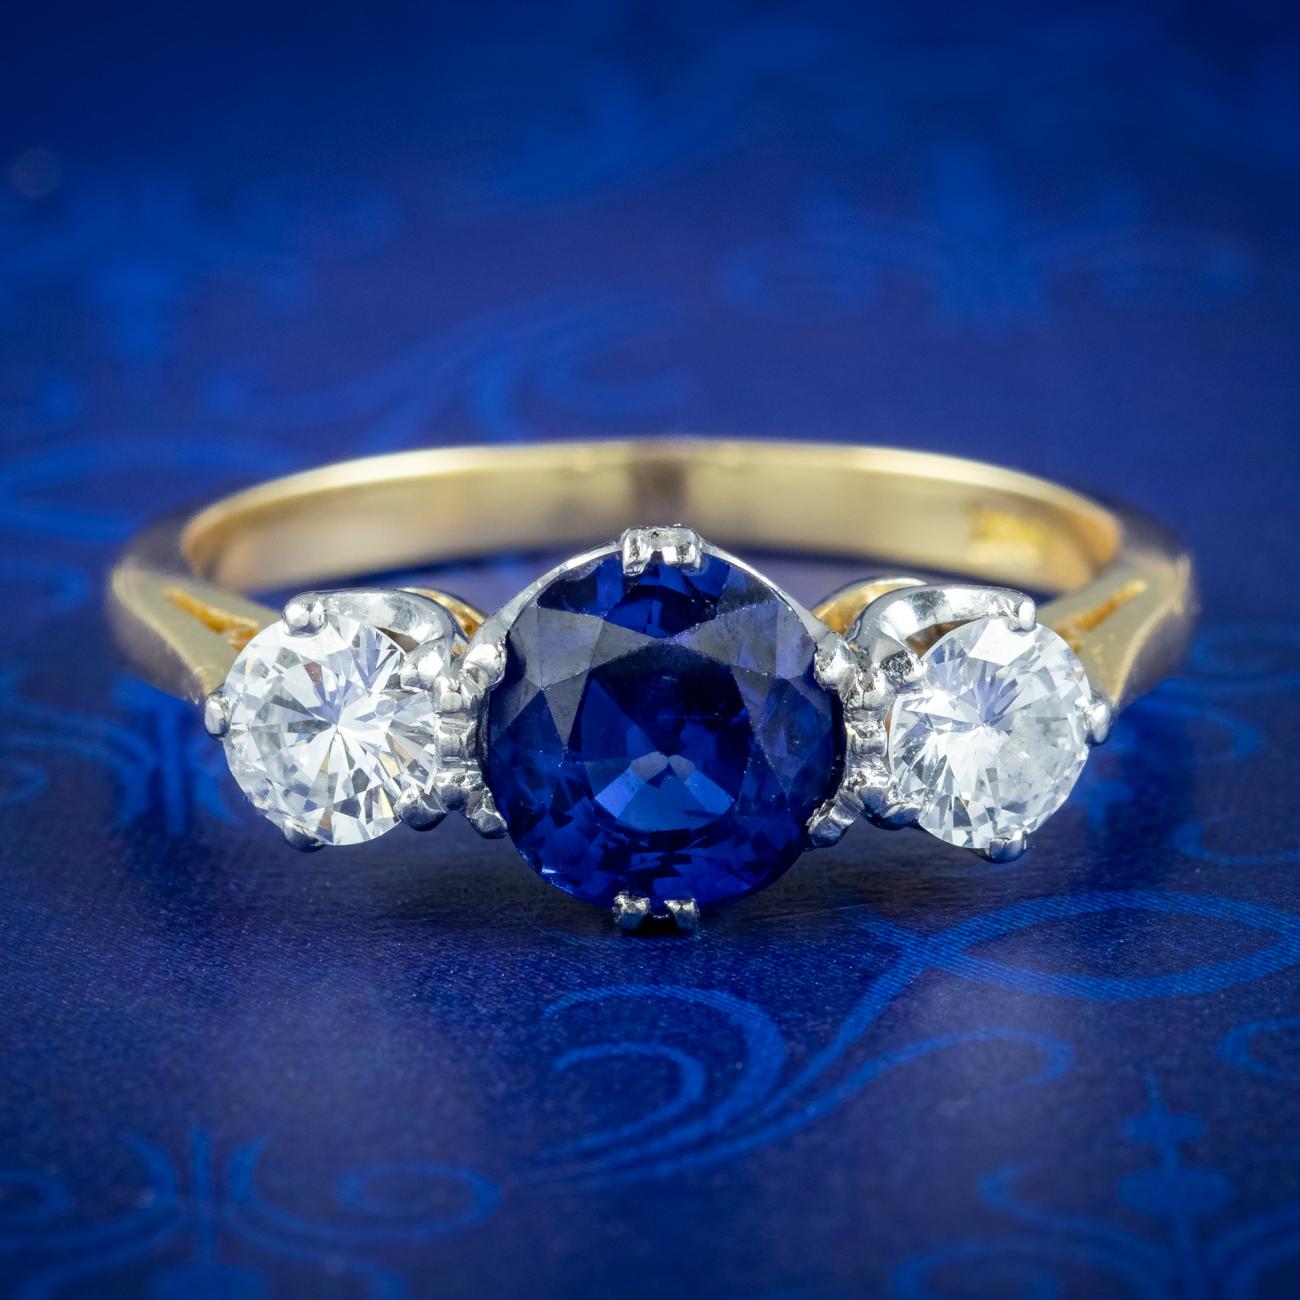 A stunning antique Edwardian trilogy ring crowned with a natural blue Ceylon sapphire flanked by two bright brilliant cut diamonds. It’s accompanied by two comprehensive gem reports which suggest the sapphire weighs between 1.45 - 1.53ct and is of